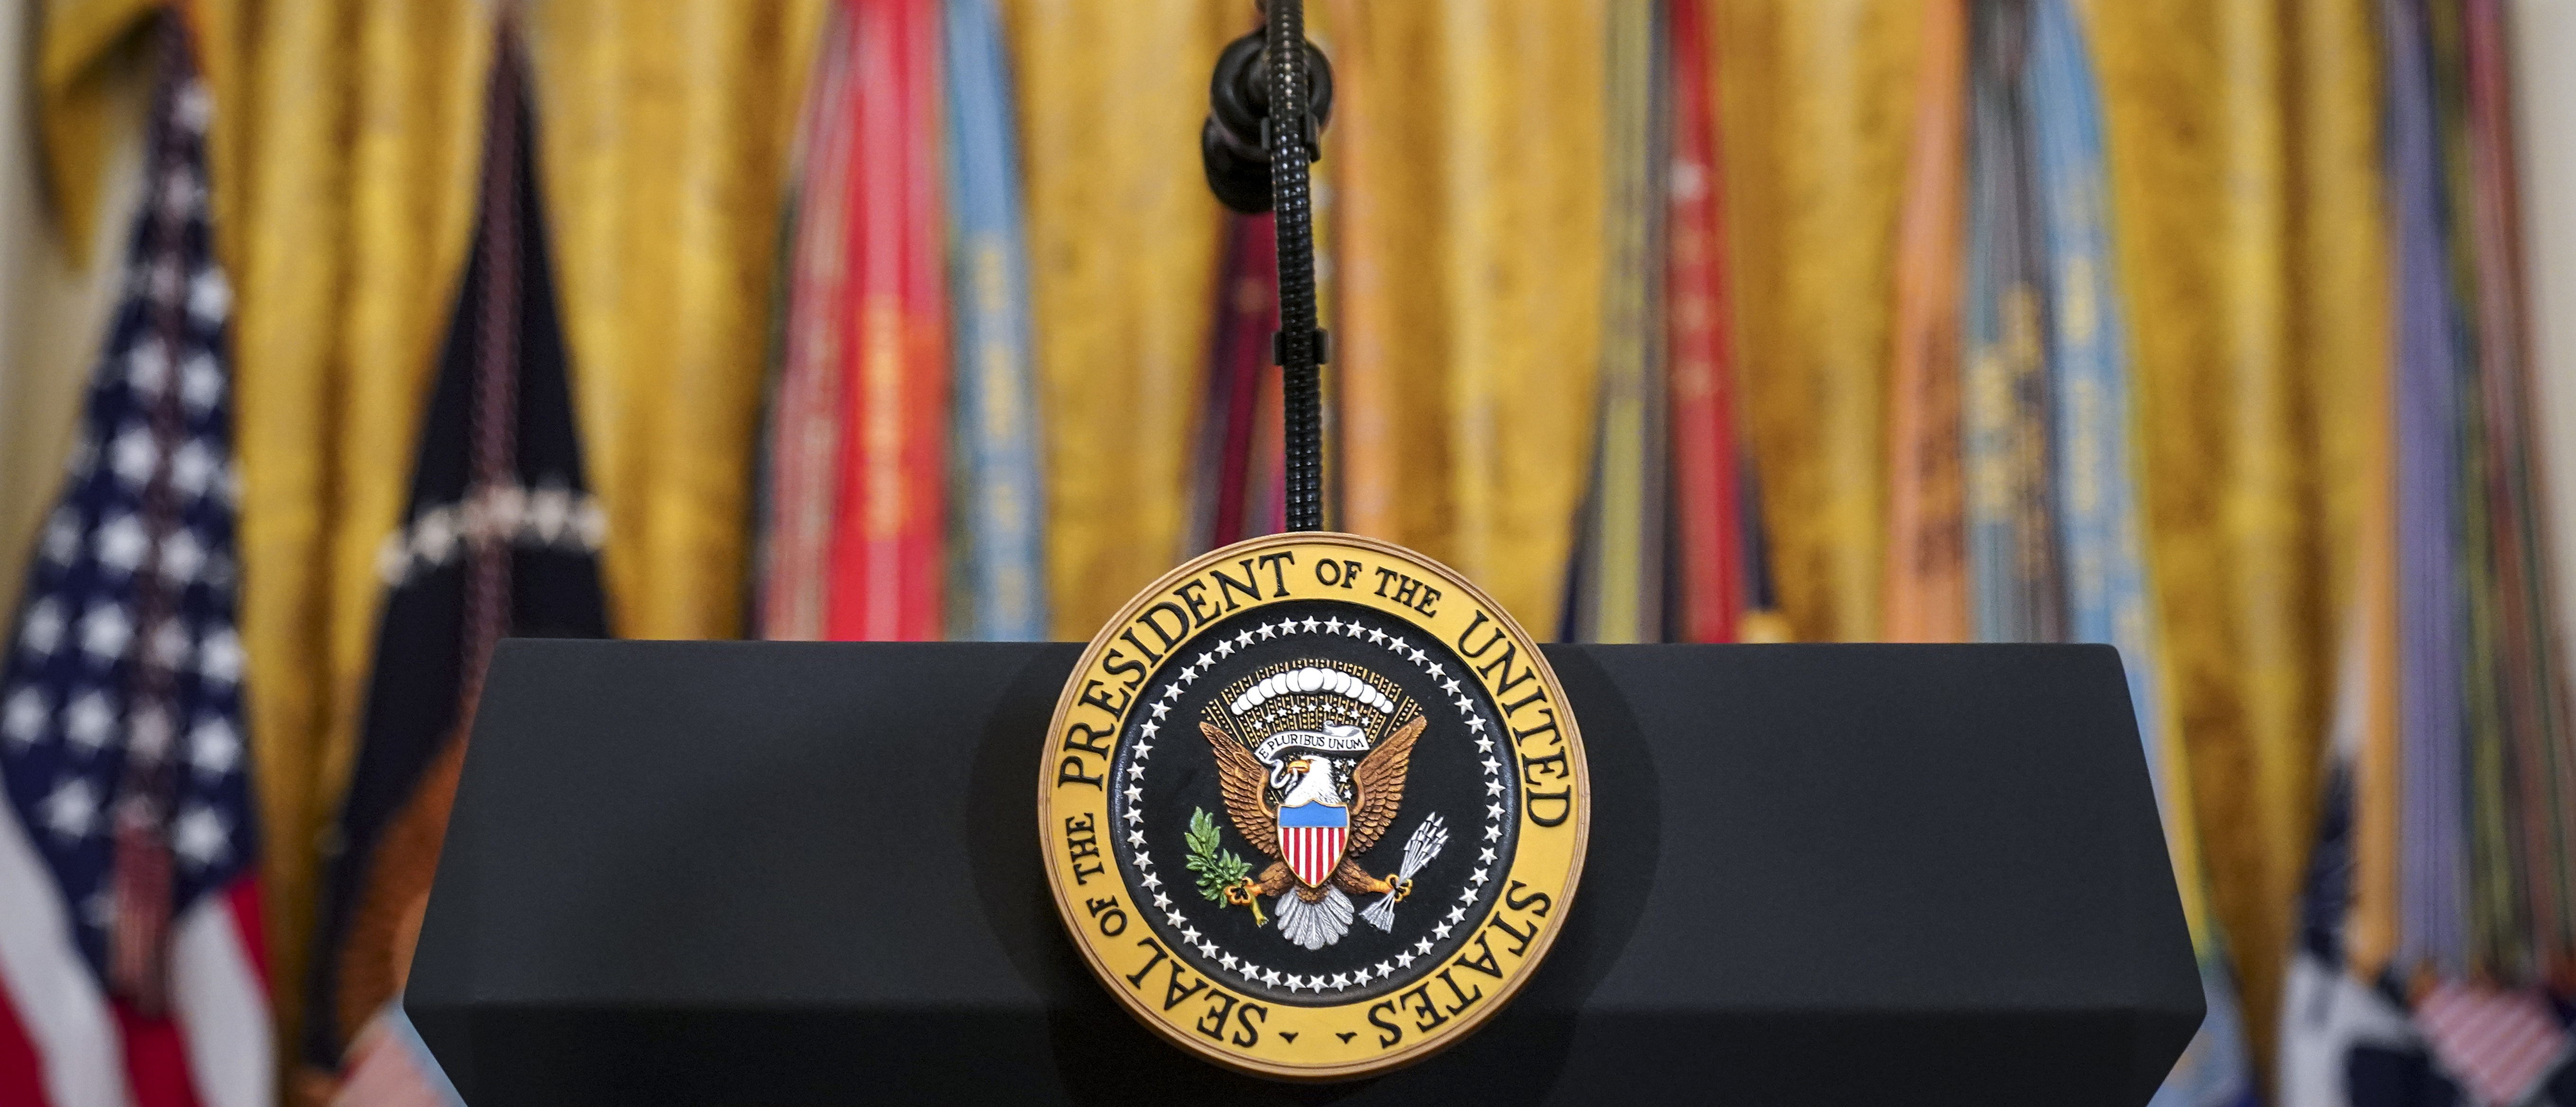 A podium with the presidential seal stands in the East Room of the White House, April 18, 2019 in Washington, DC. (Photo: Drew Angerer/Getty Images)